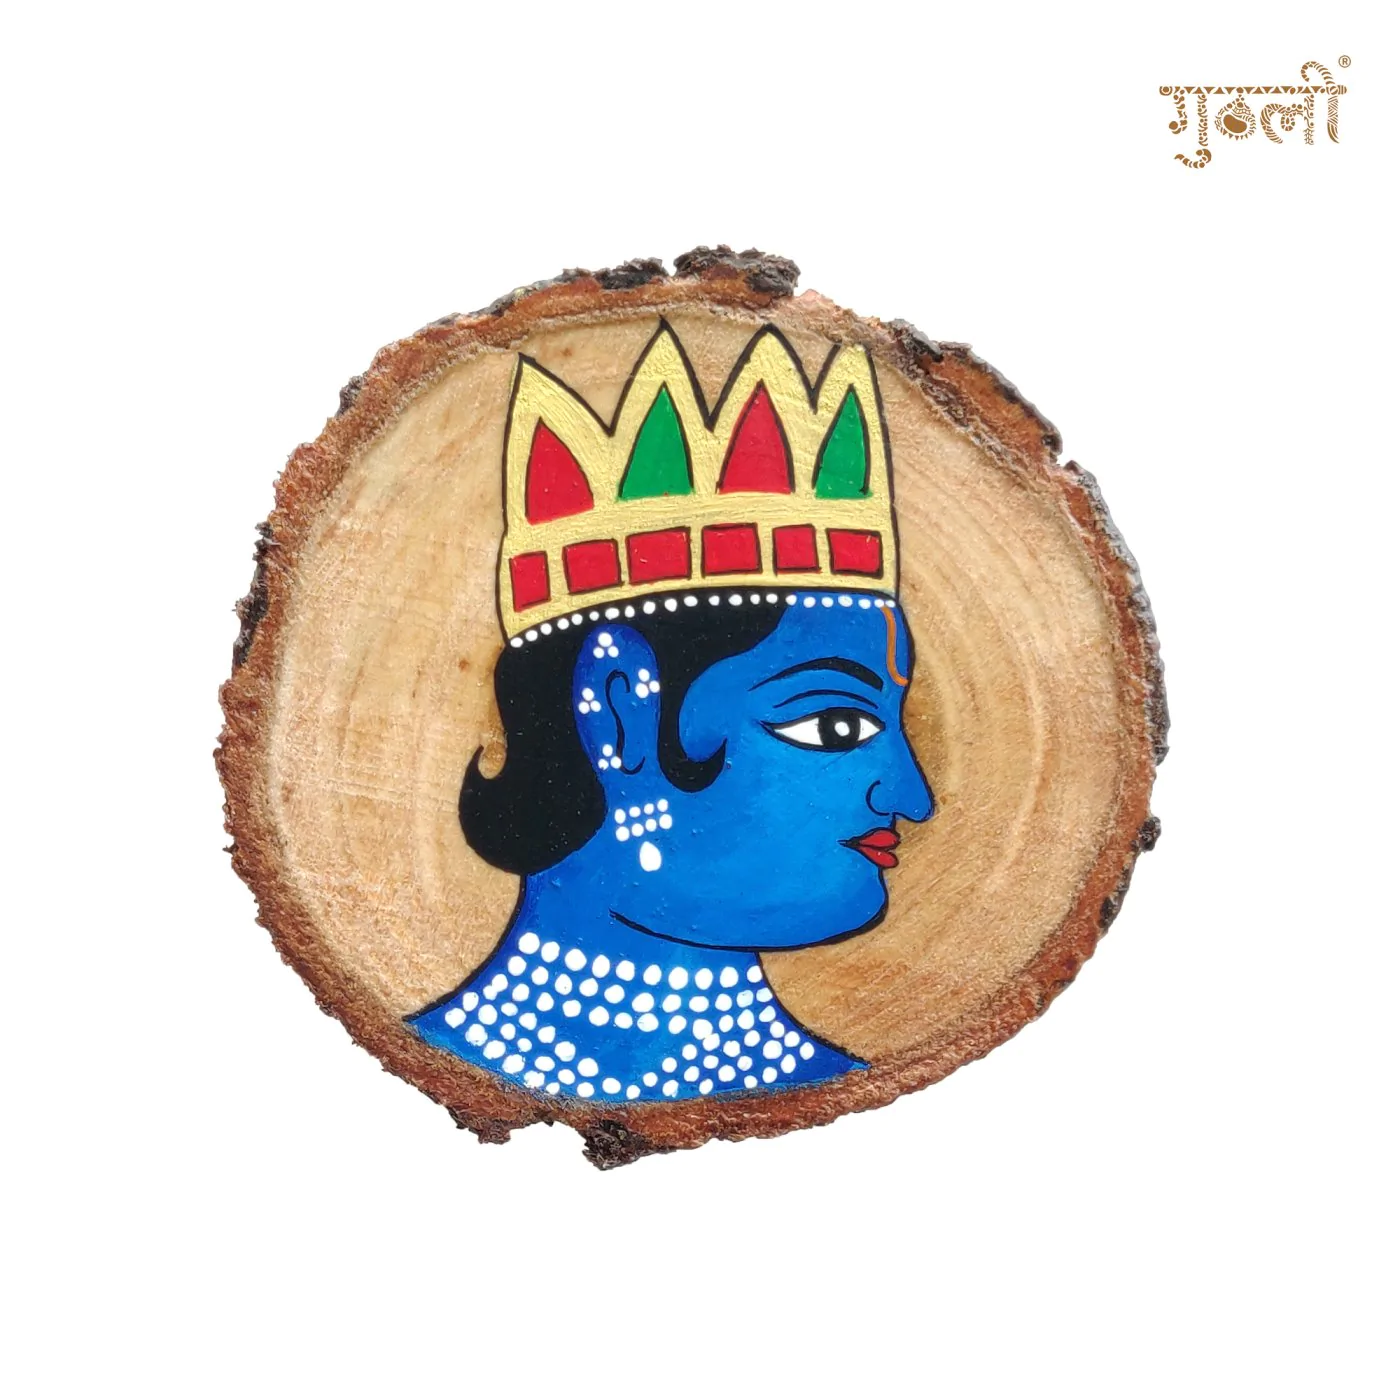 Miniature Art Wooden Coaster Made By Hand Online Buy 1024×1024@2x